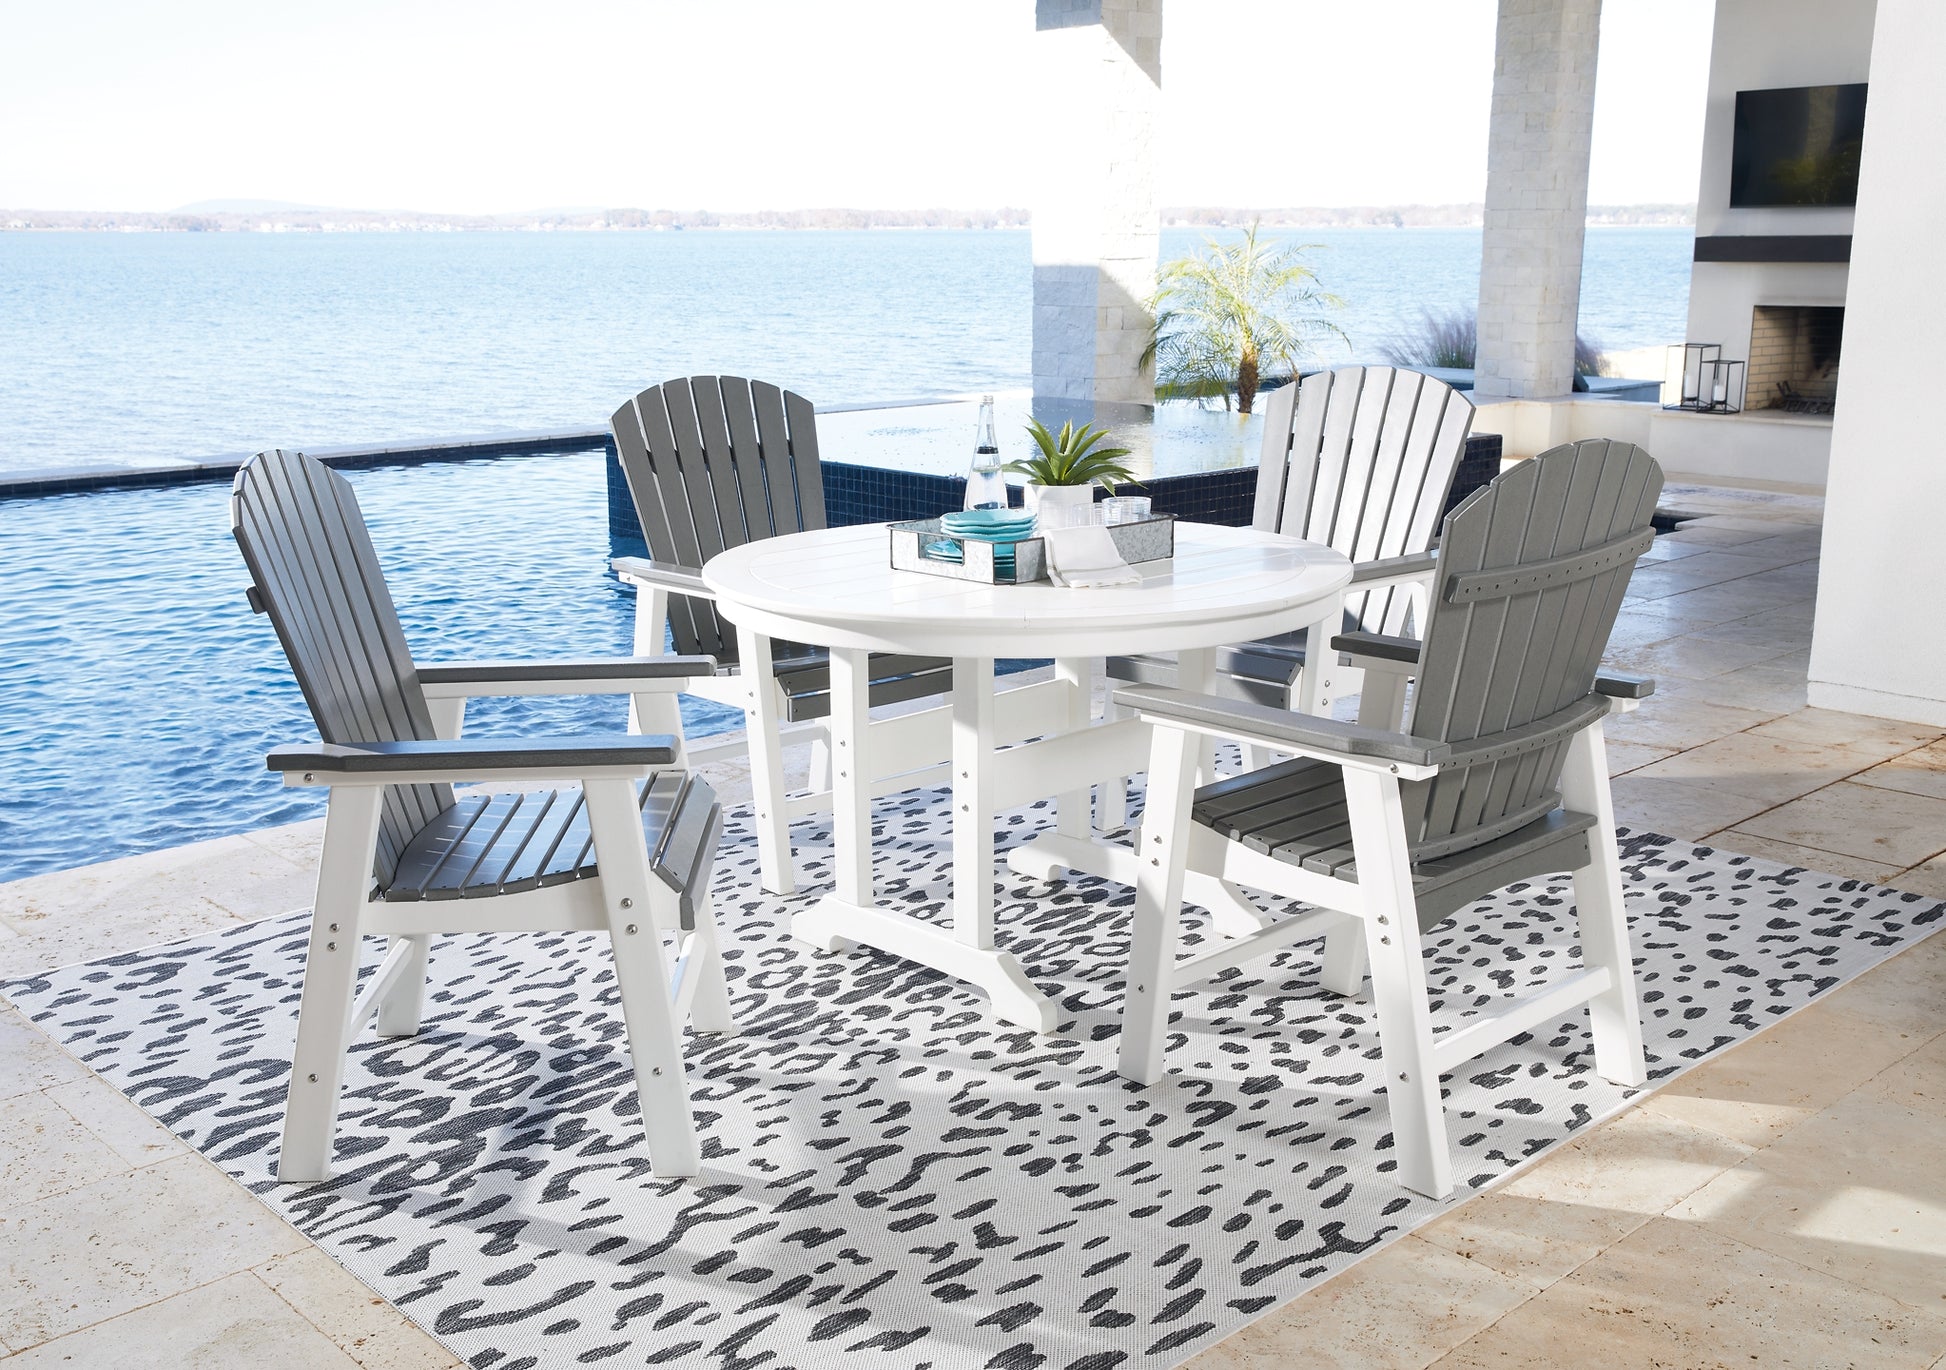 Crescent Luxe Outdoor Dining Table and 4 Chairs Wilson Furniture (OH)  in Bridgeport, Ohio. Serving Bridgeport, Yorkville, Bellaire, & Avondale